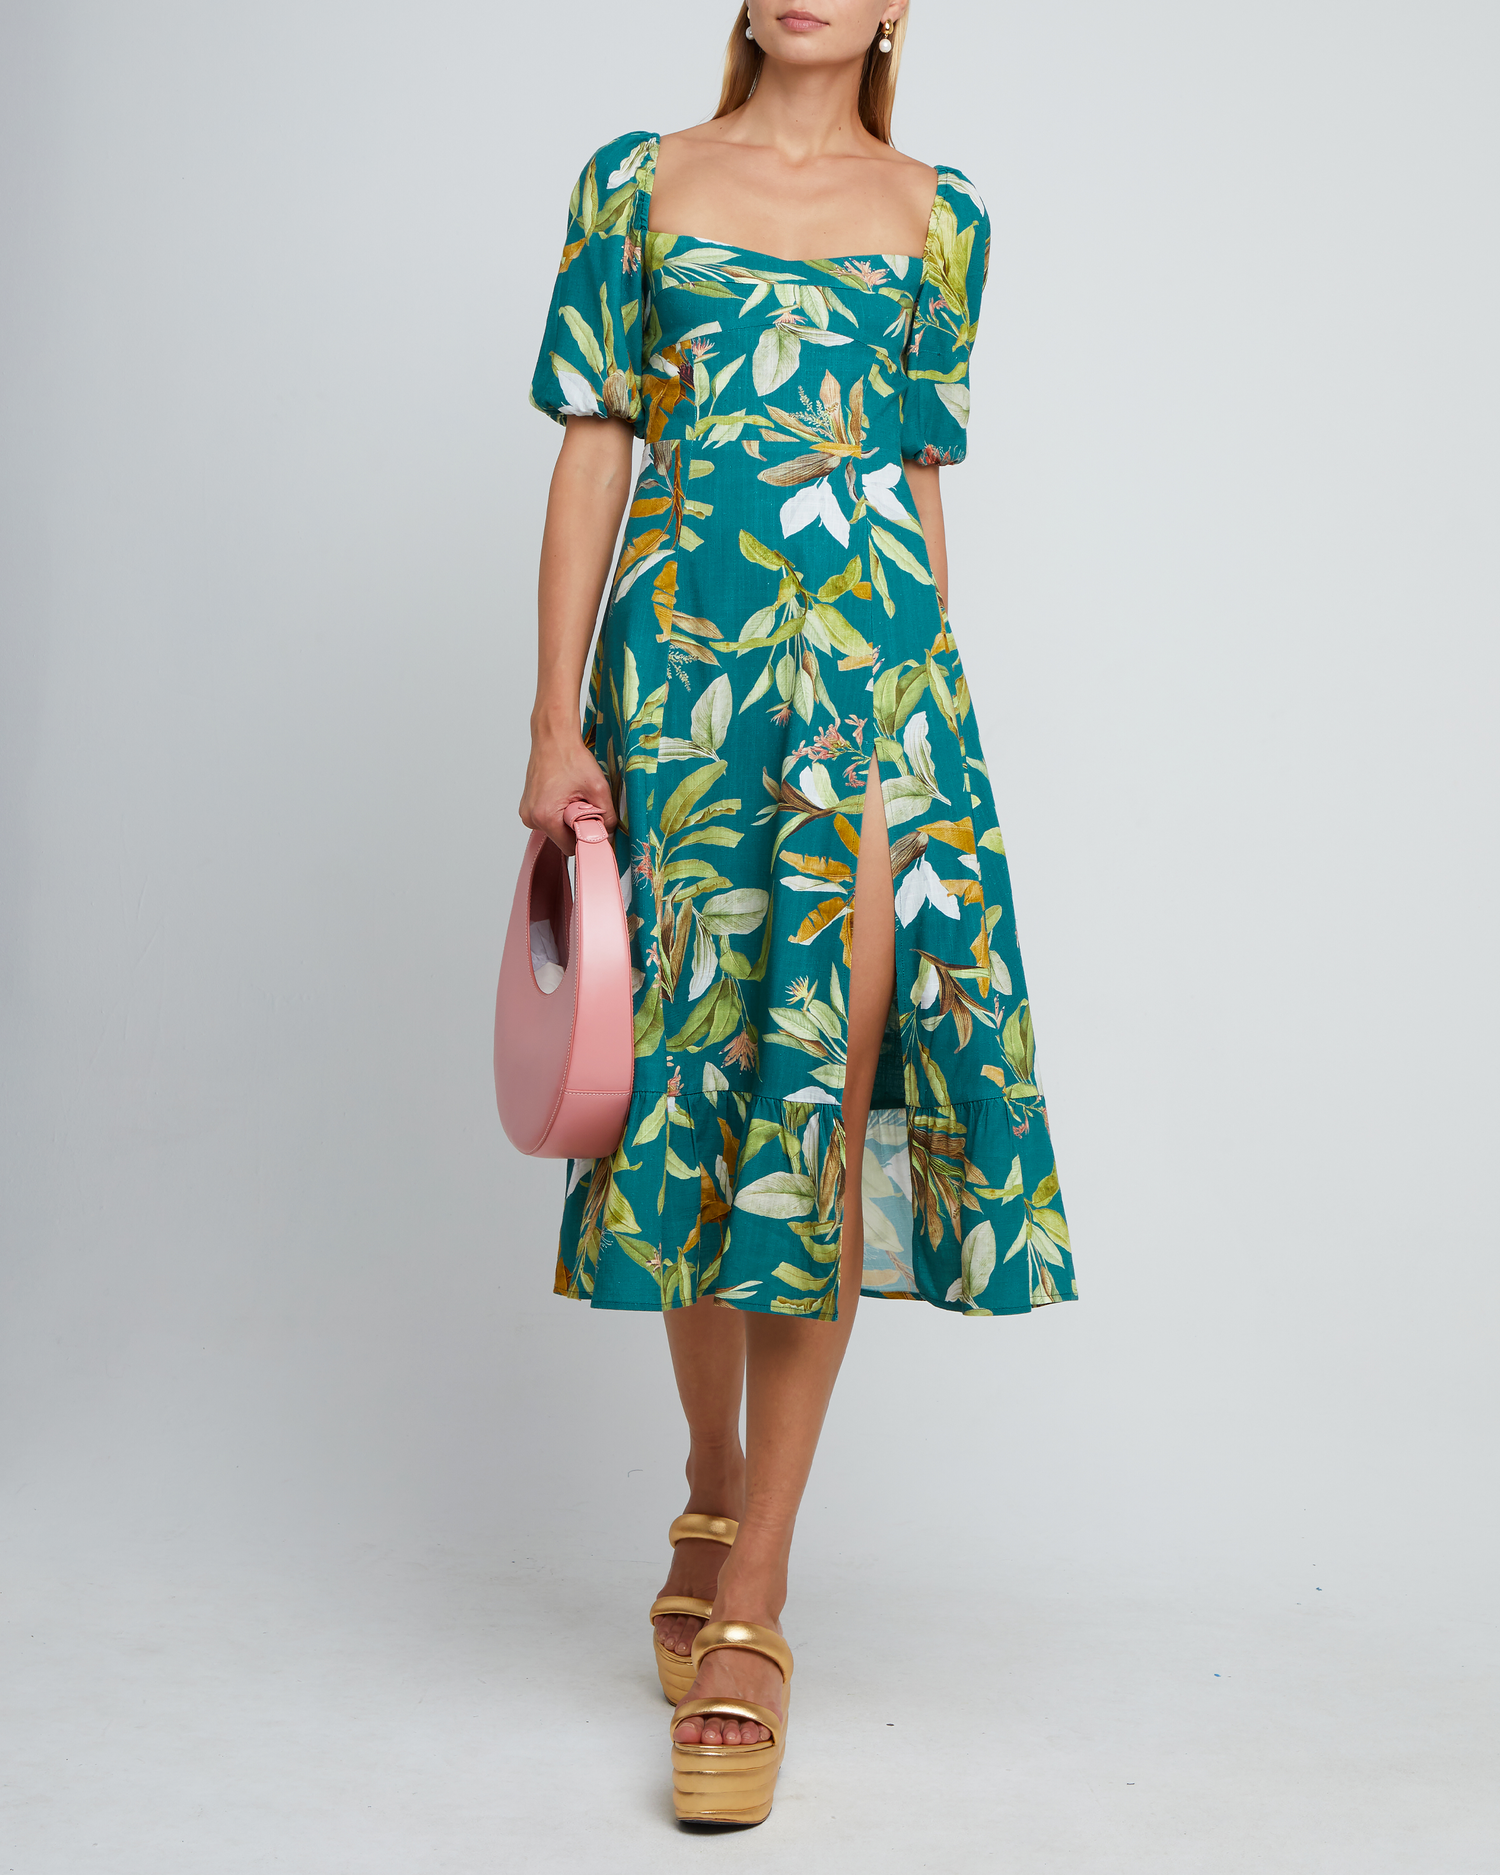 First image of Violetta Midi Dress, a green midi dress, sweetheart neckline, short sleeves, puff sleeves, side slit, tropical print, floral